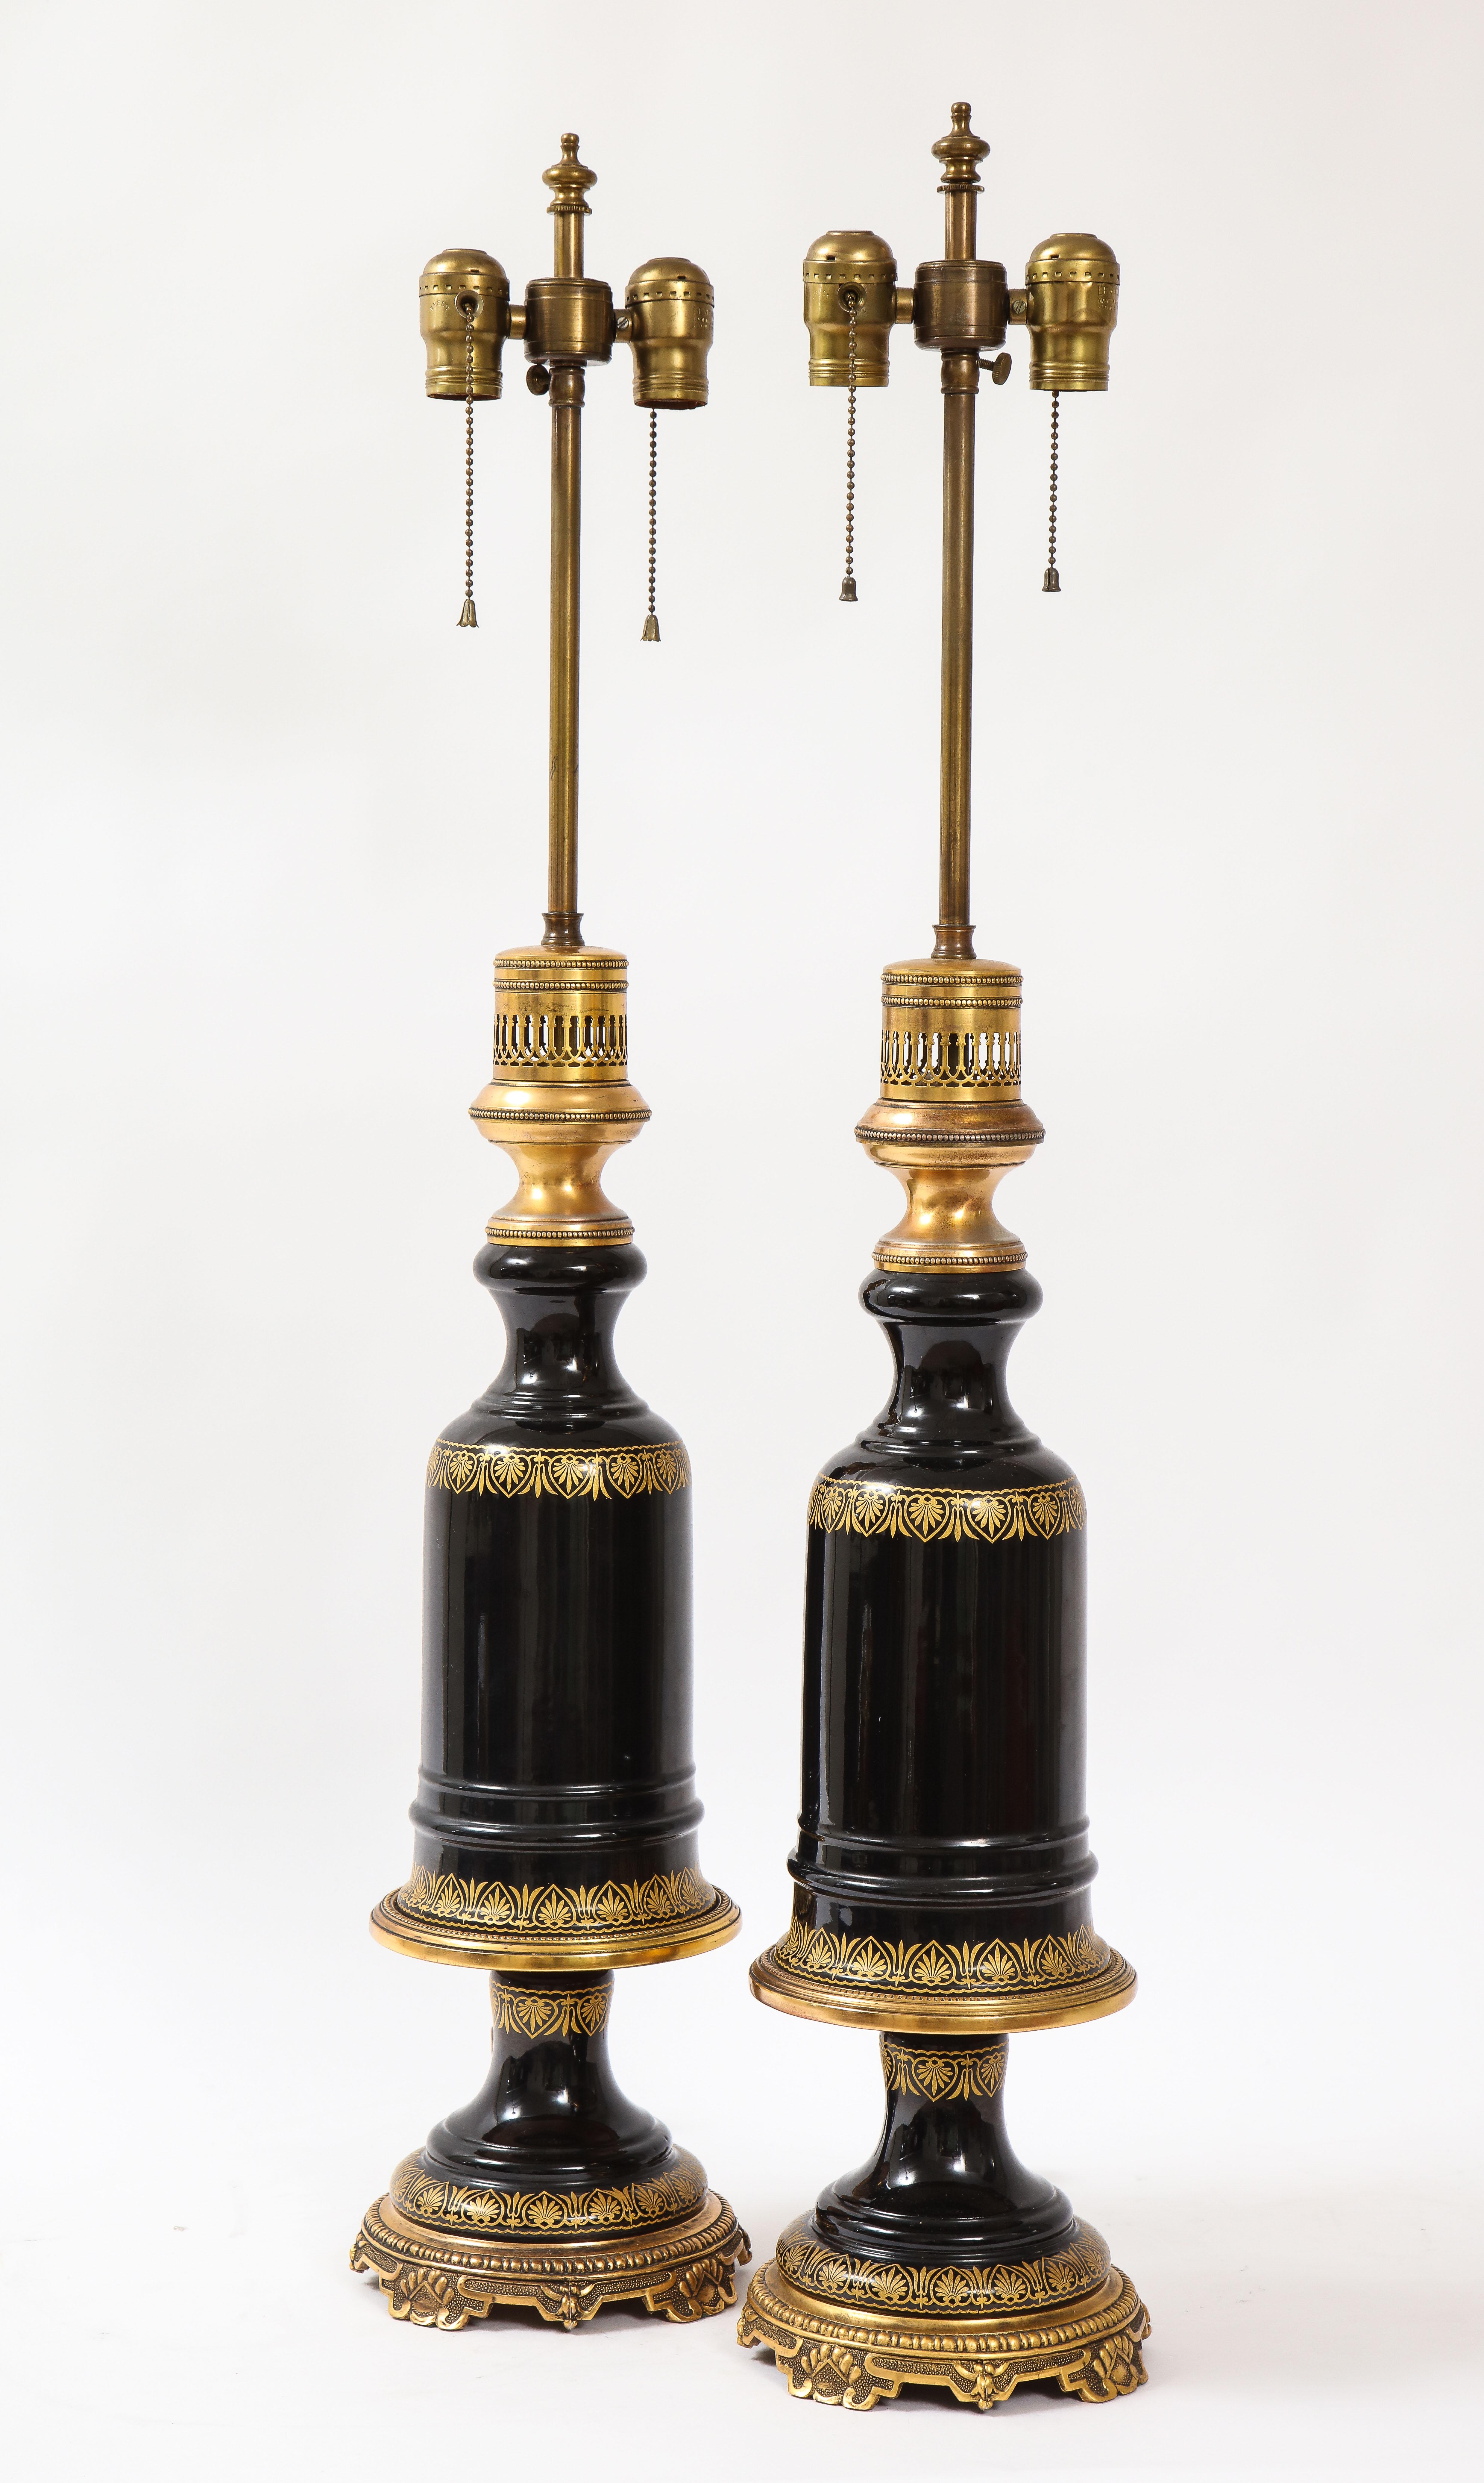 A beautiful pair of French gilt bronze mounted black amethyst crystal lamps. Each is beautifully hand blown out of black amethyst crystal and further adorned with 24-karat gilt decoration. They are each skillfully mounted on gilt bronze mounts which